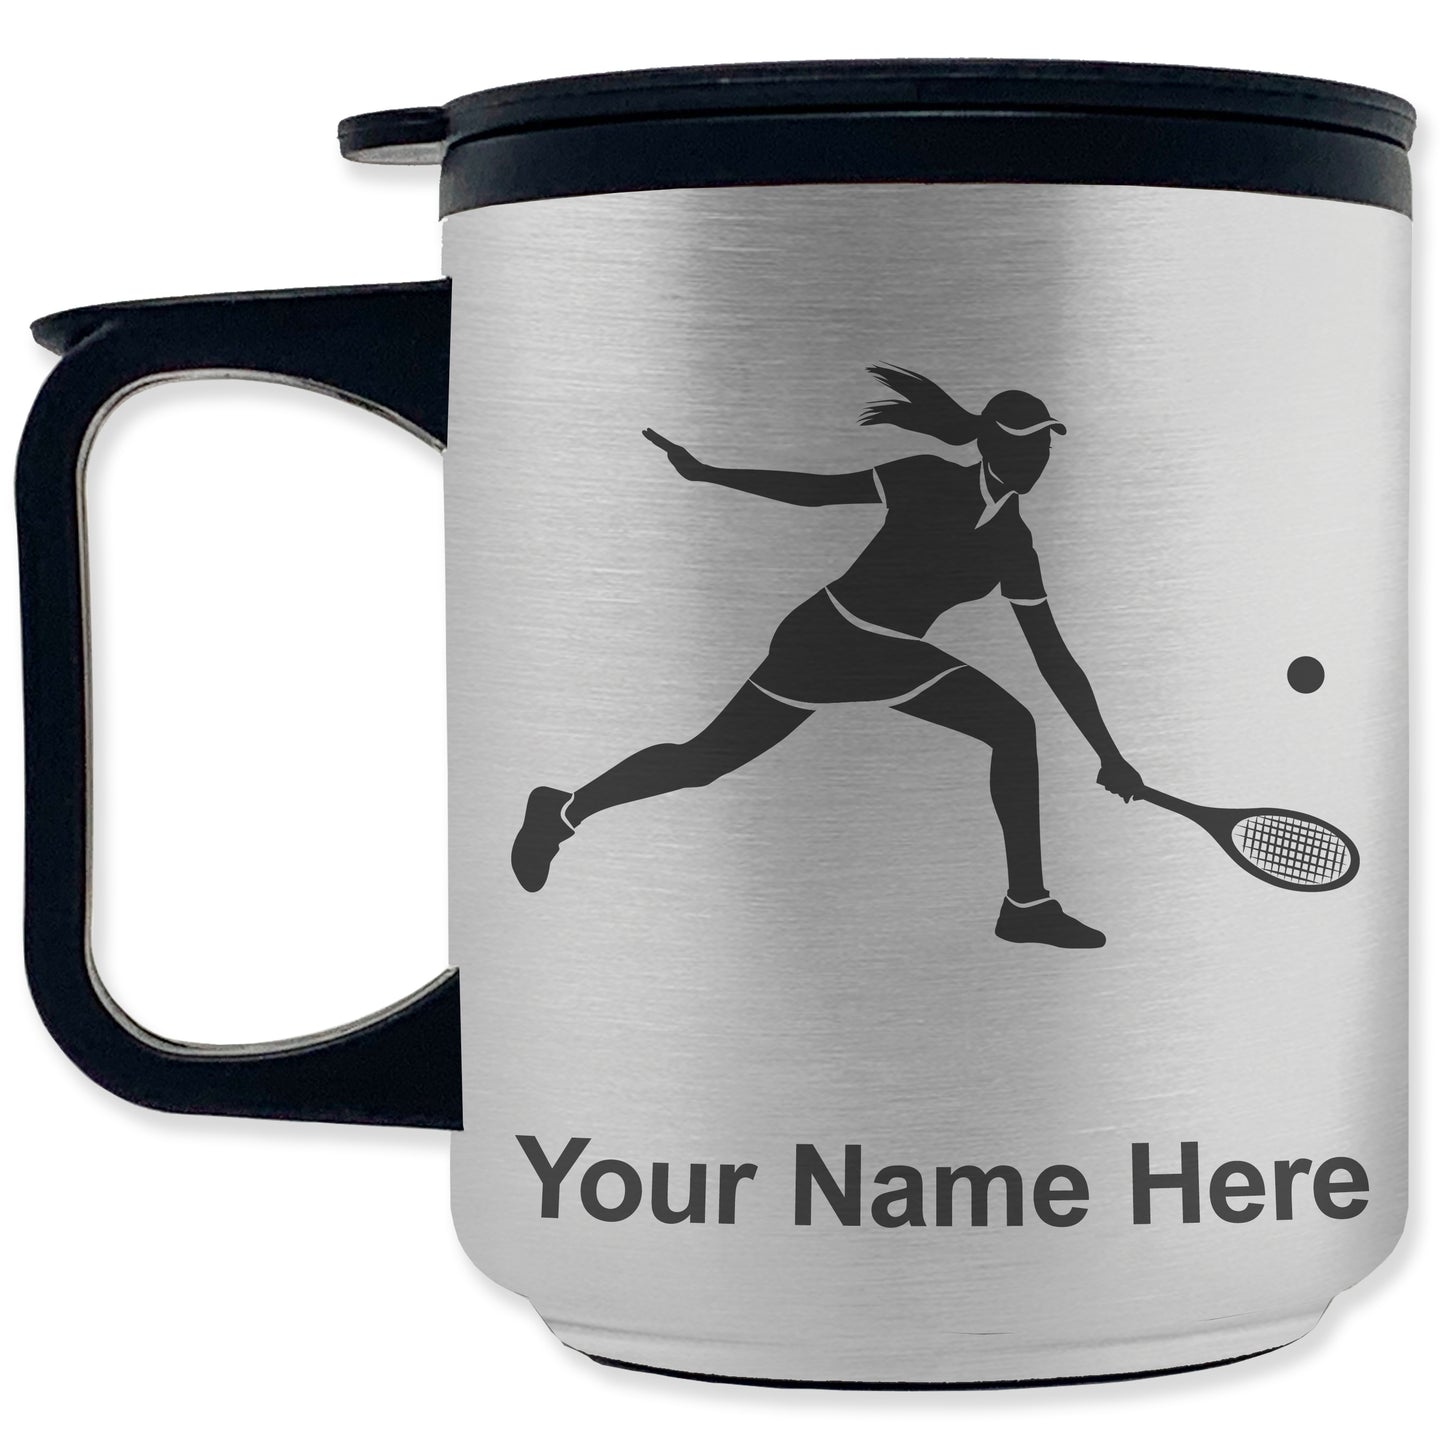 Coffee Travel Mug, Tennis Player Woman, Personalized Engraving Included